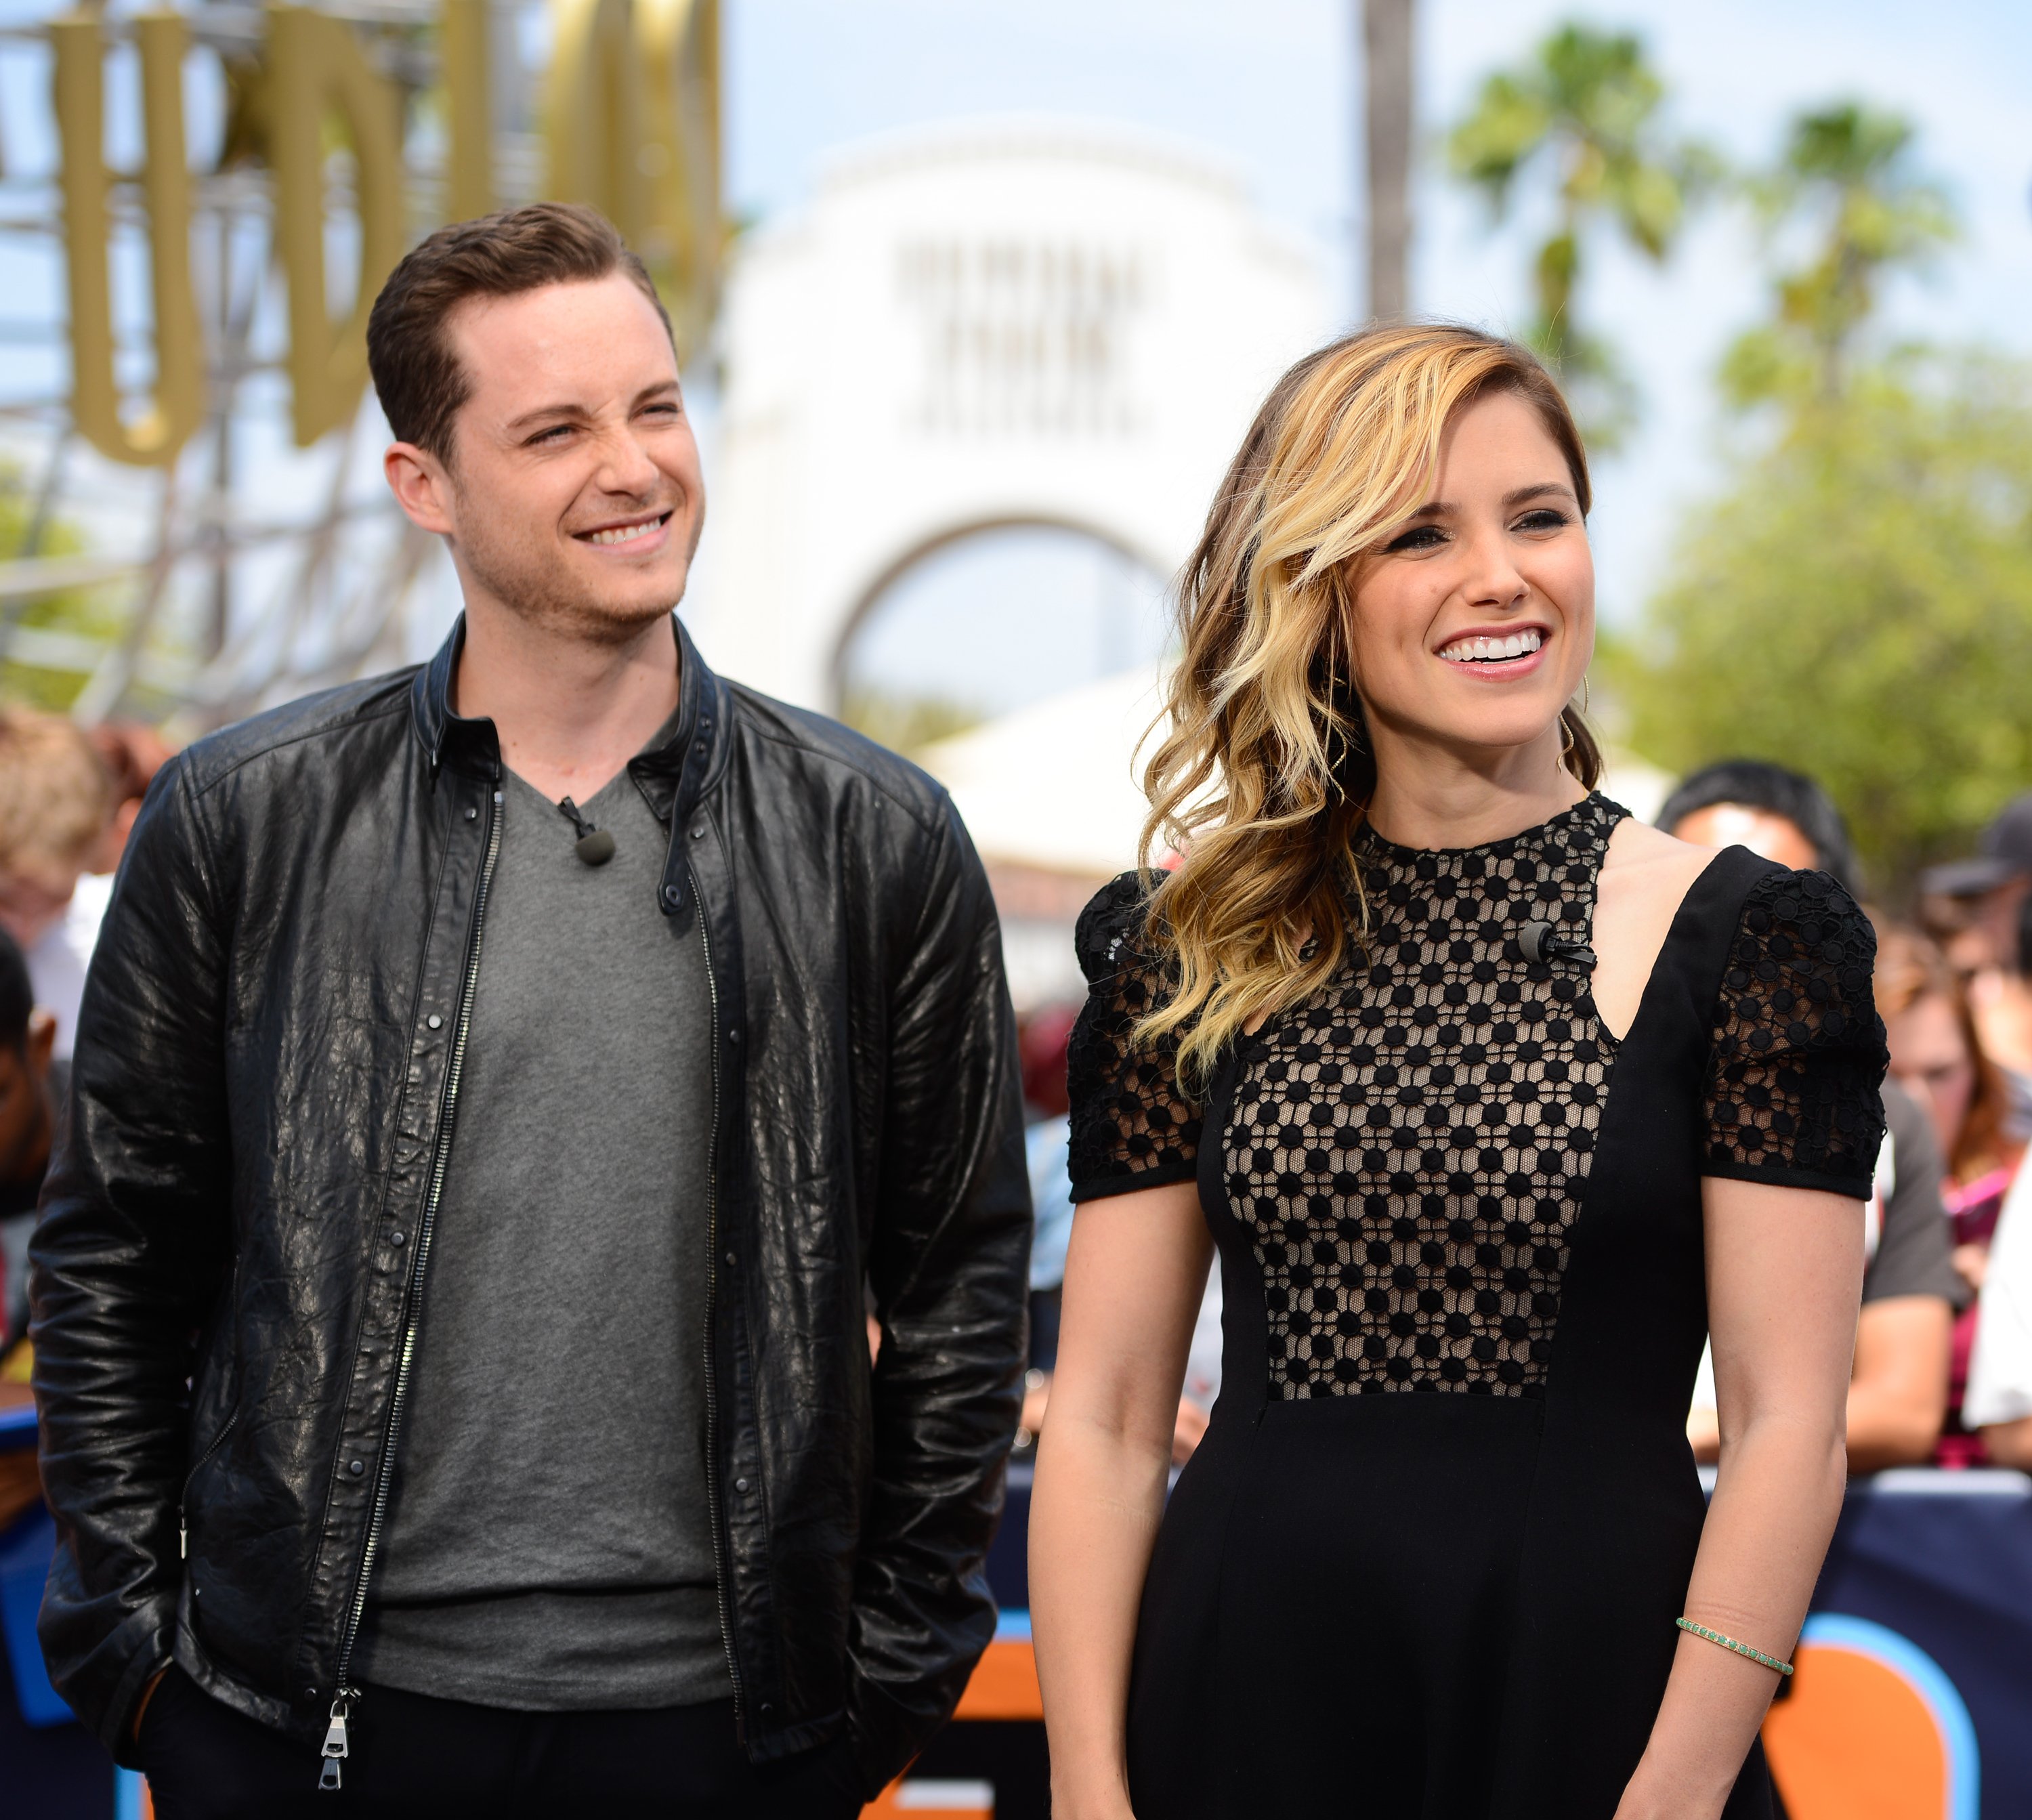 Does Jesse Lee Soffer Have a Wife? Inside the Love Life of the 'Chicago  .' Star